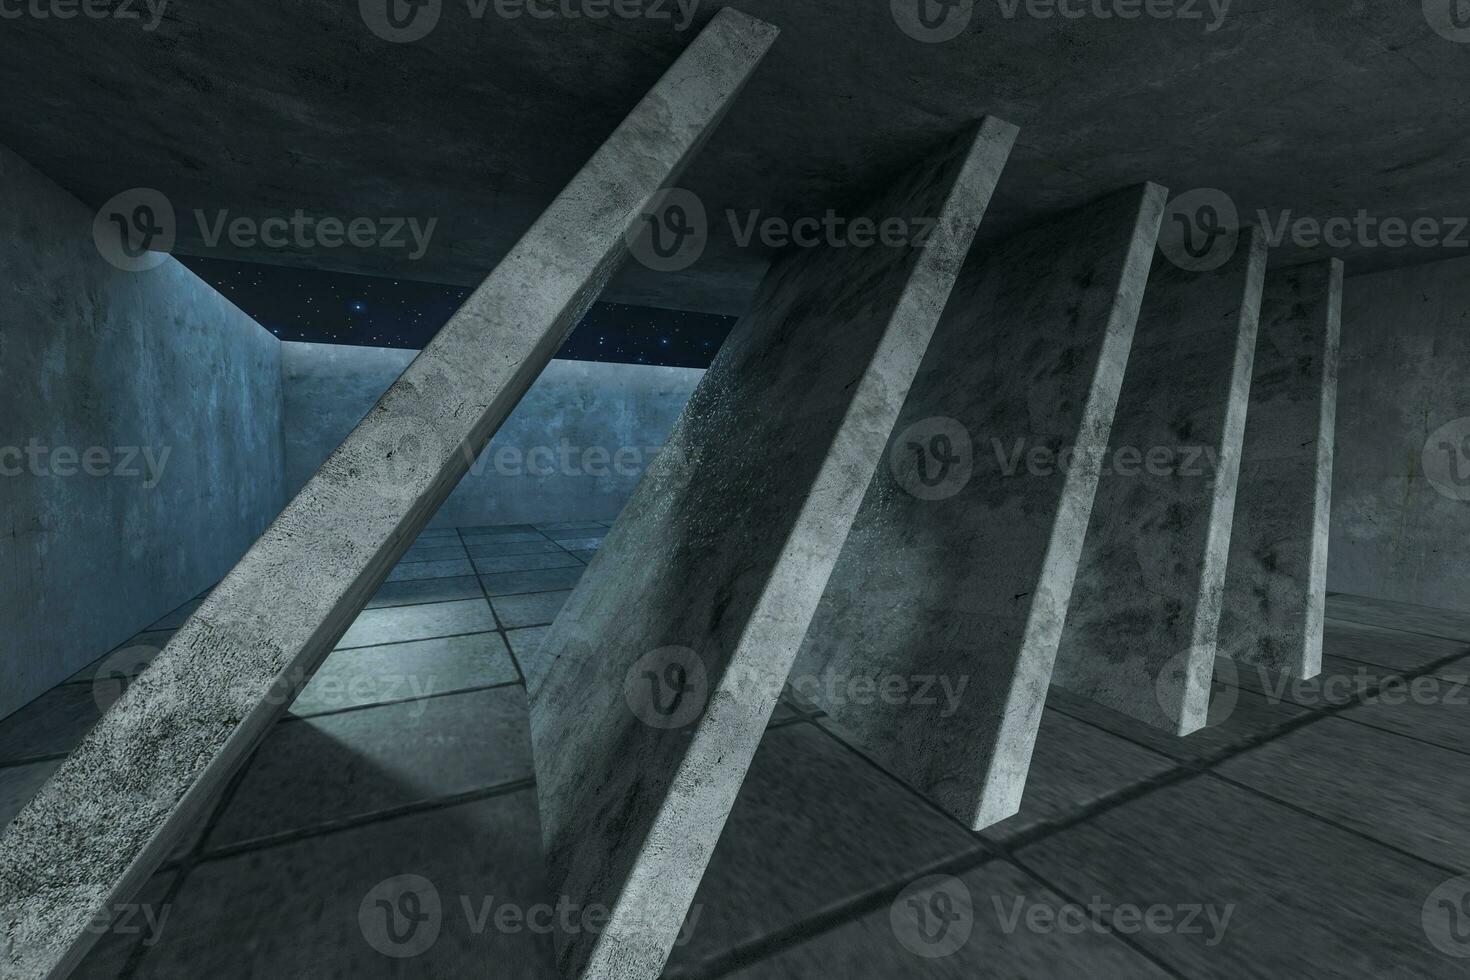 3d rendering, concrete room with creative construction. photo